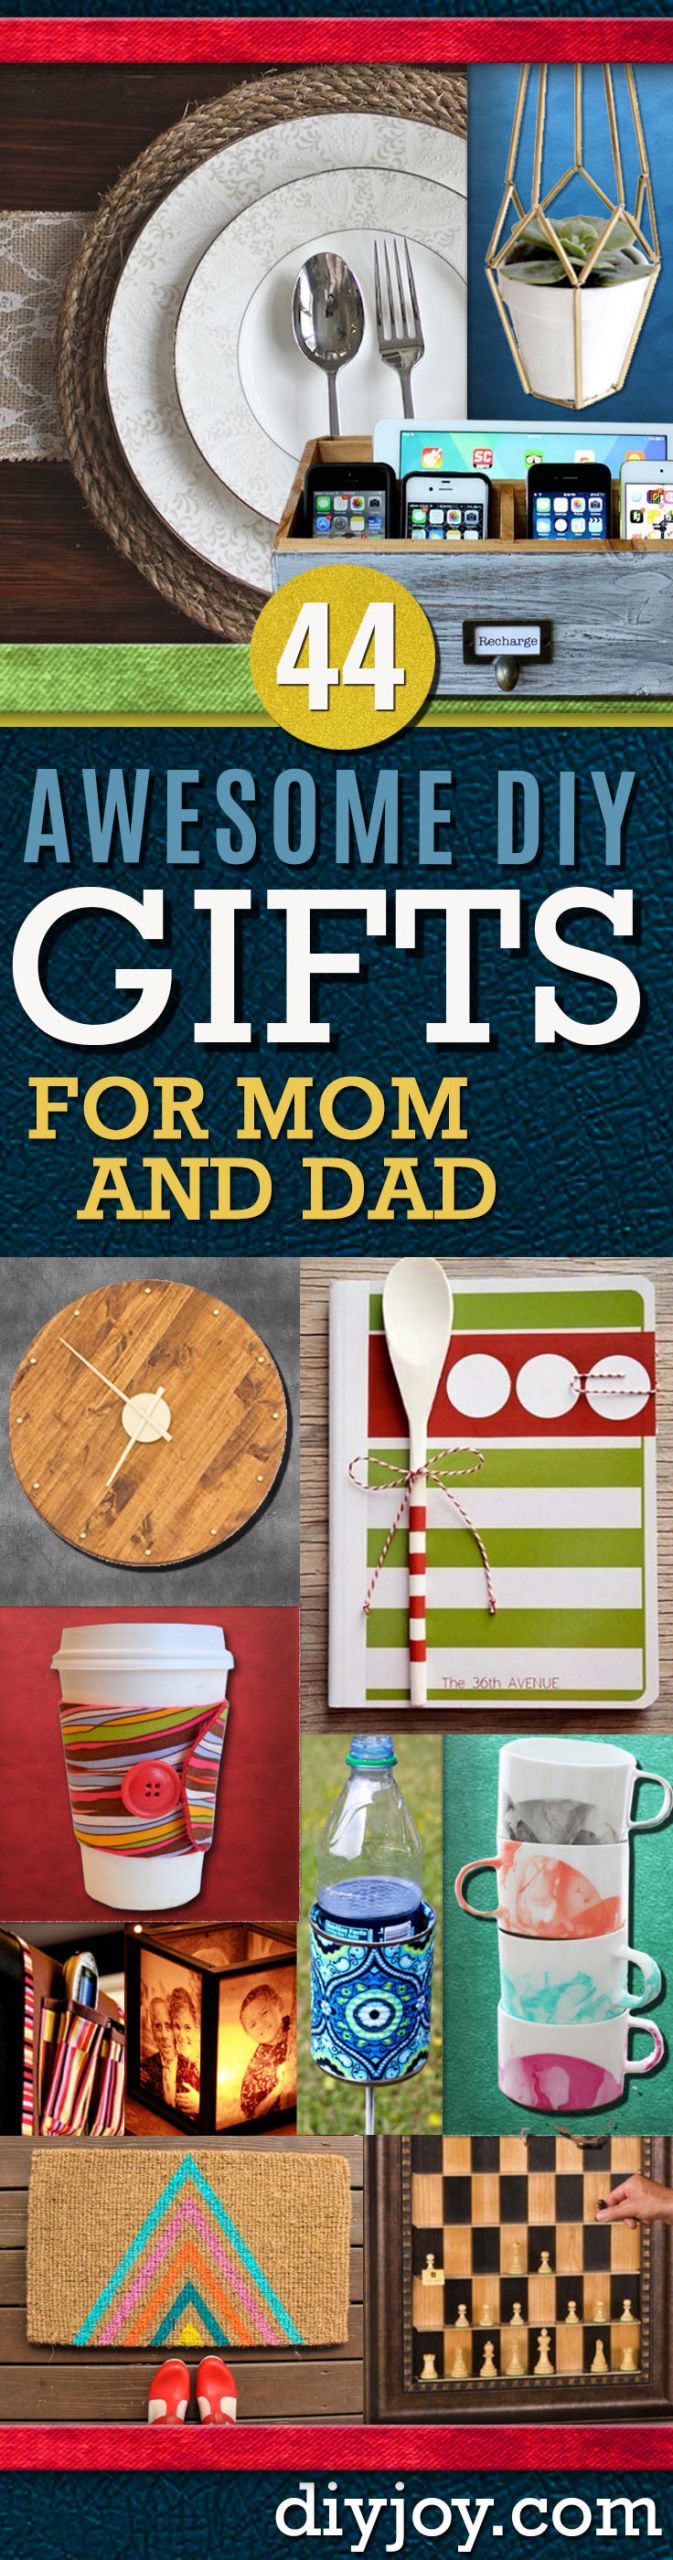 Holiday Gift Ideas For Mom
 44 DIY Gift Ideas For Mom and Dad